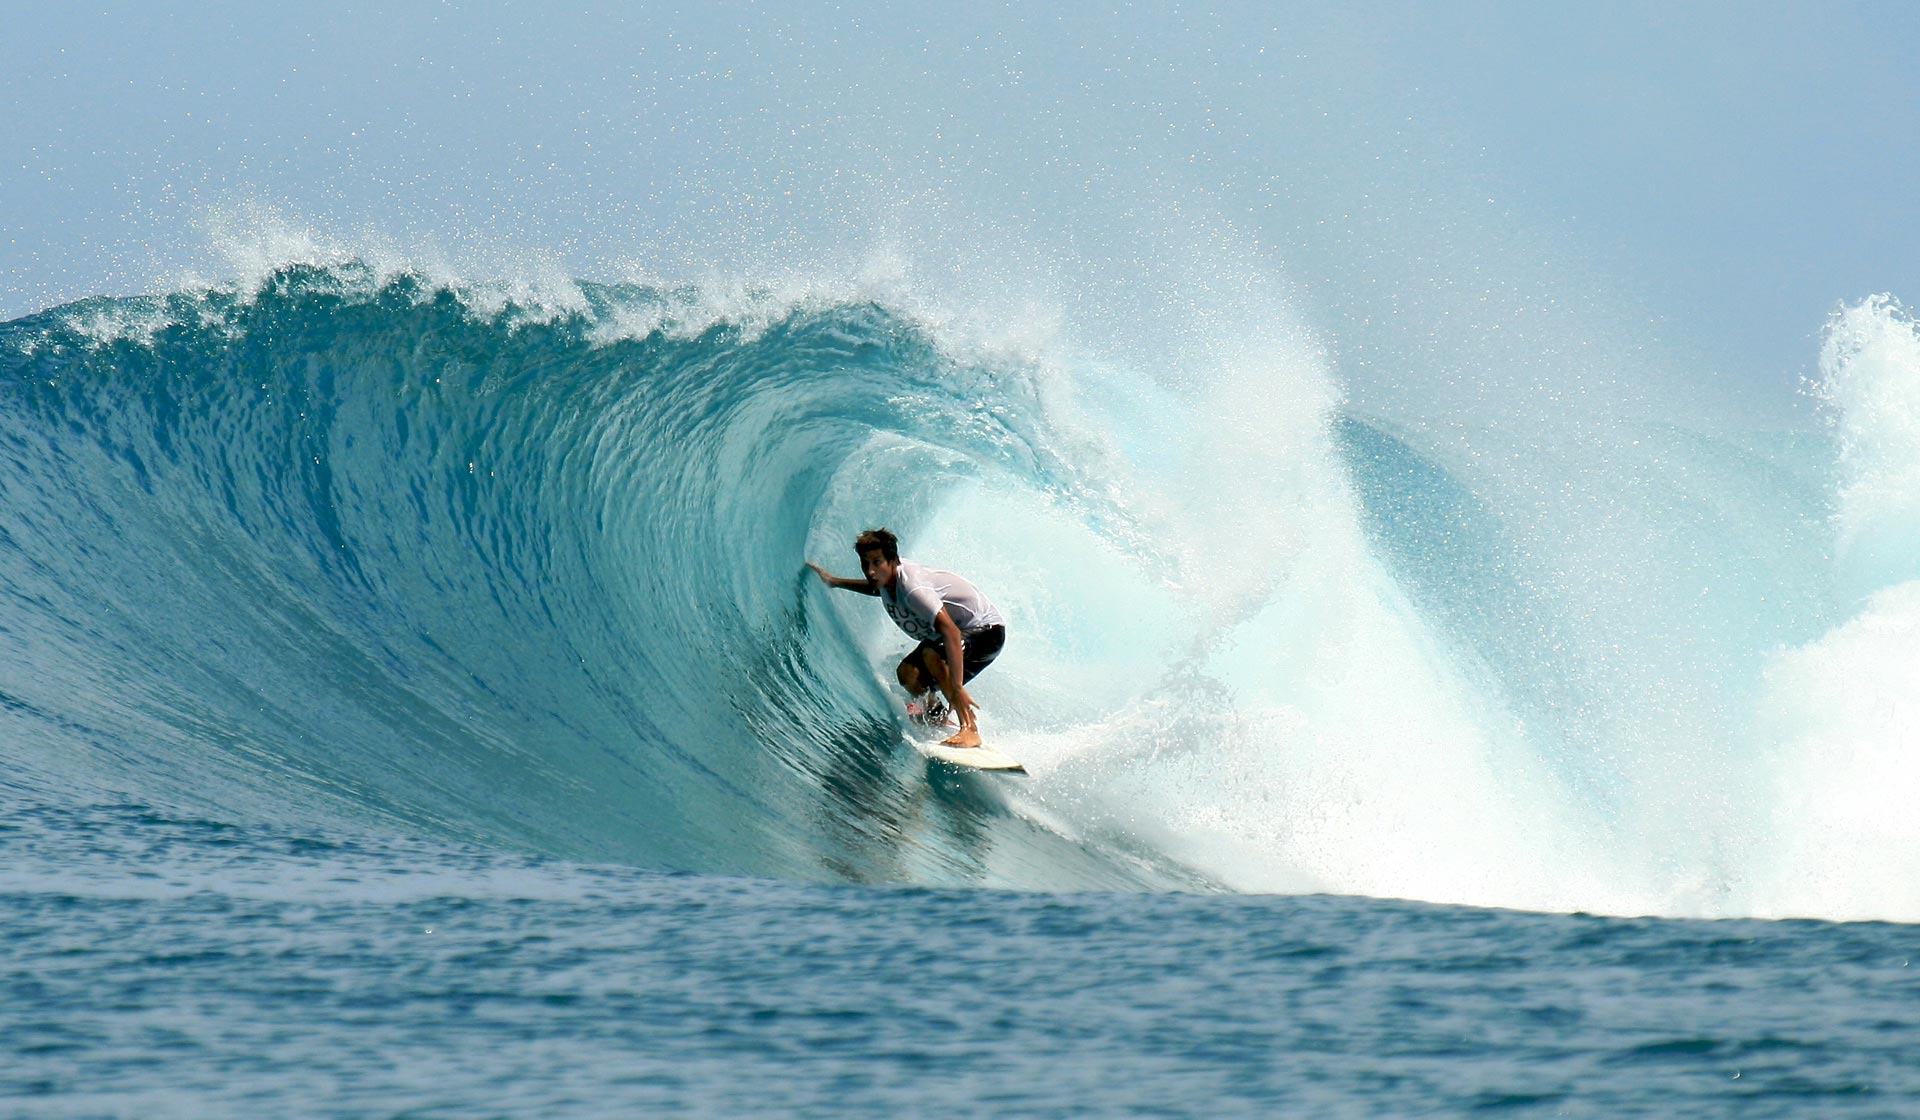 surfwg surf camp Bali – learn to surf the waves